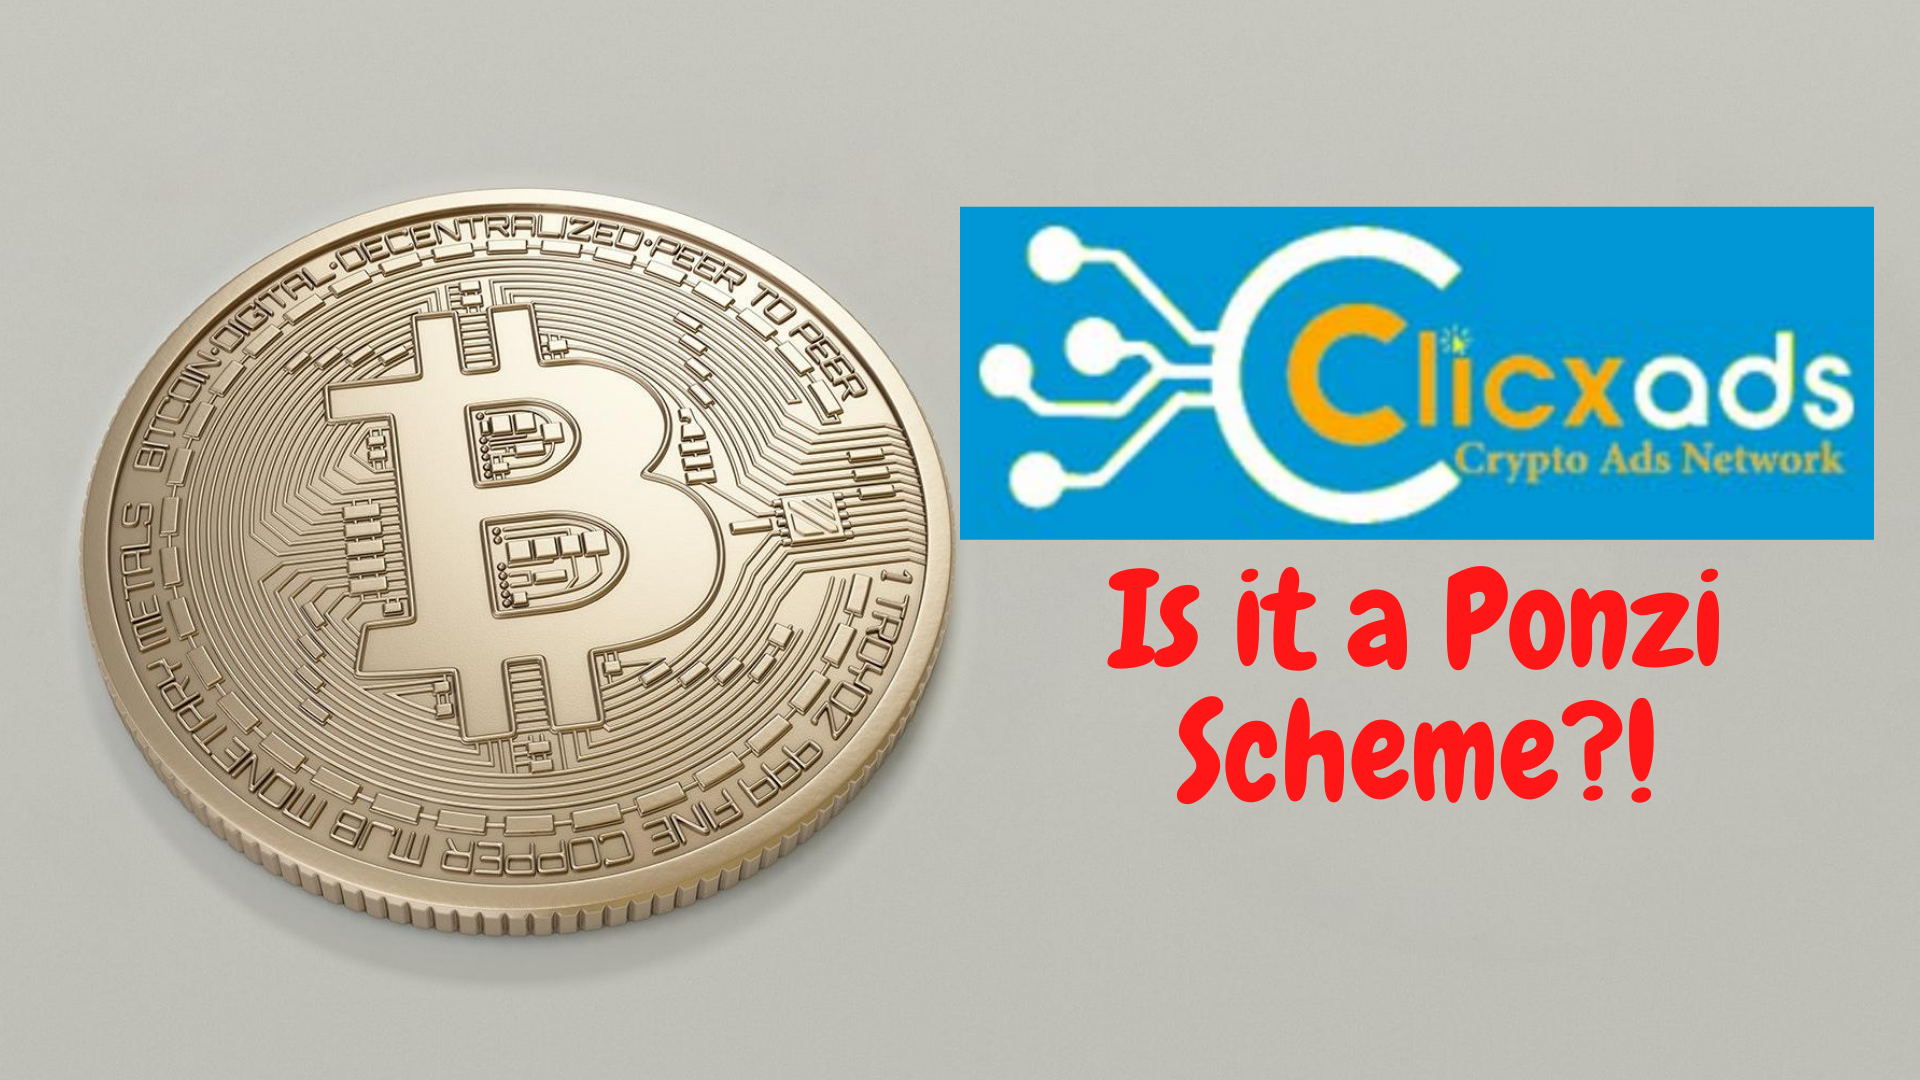 Is Clicxads a scam